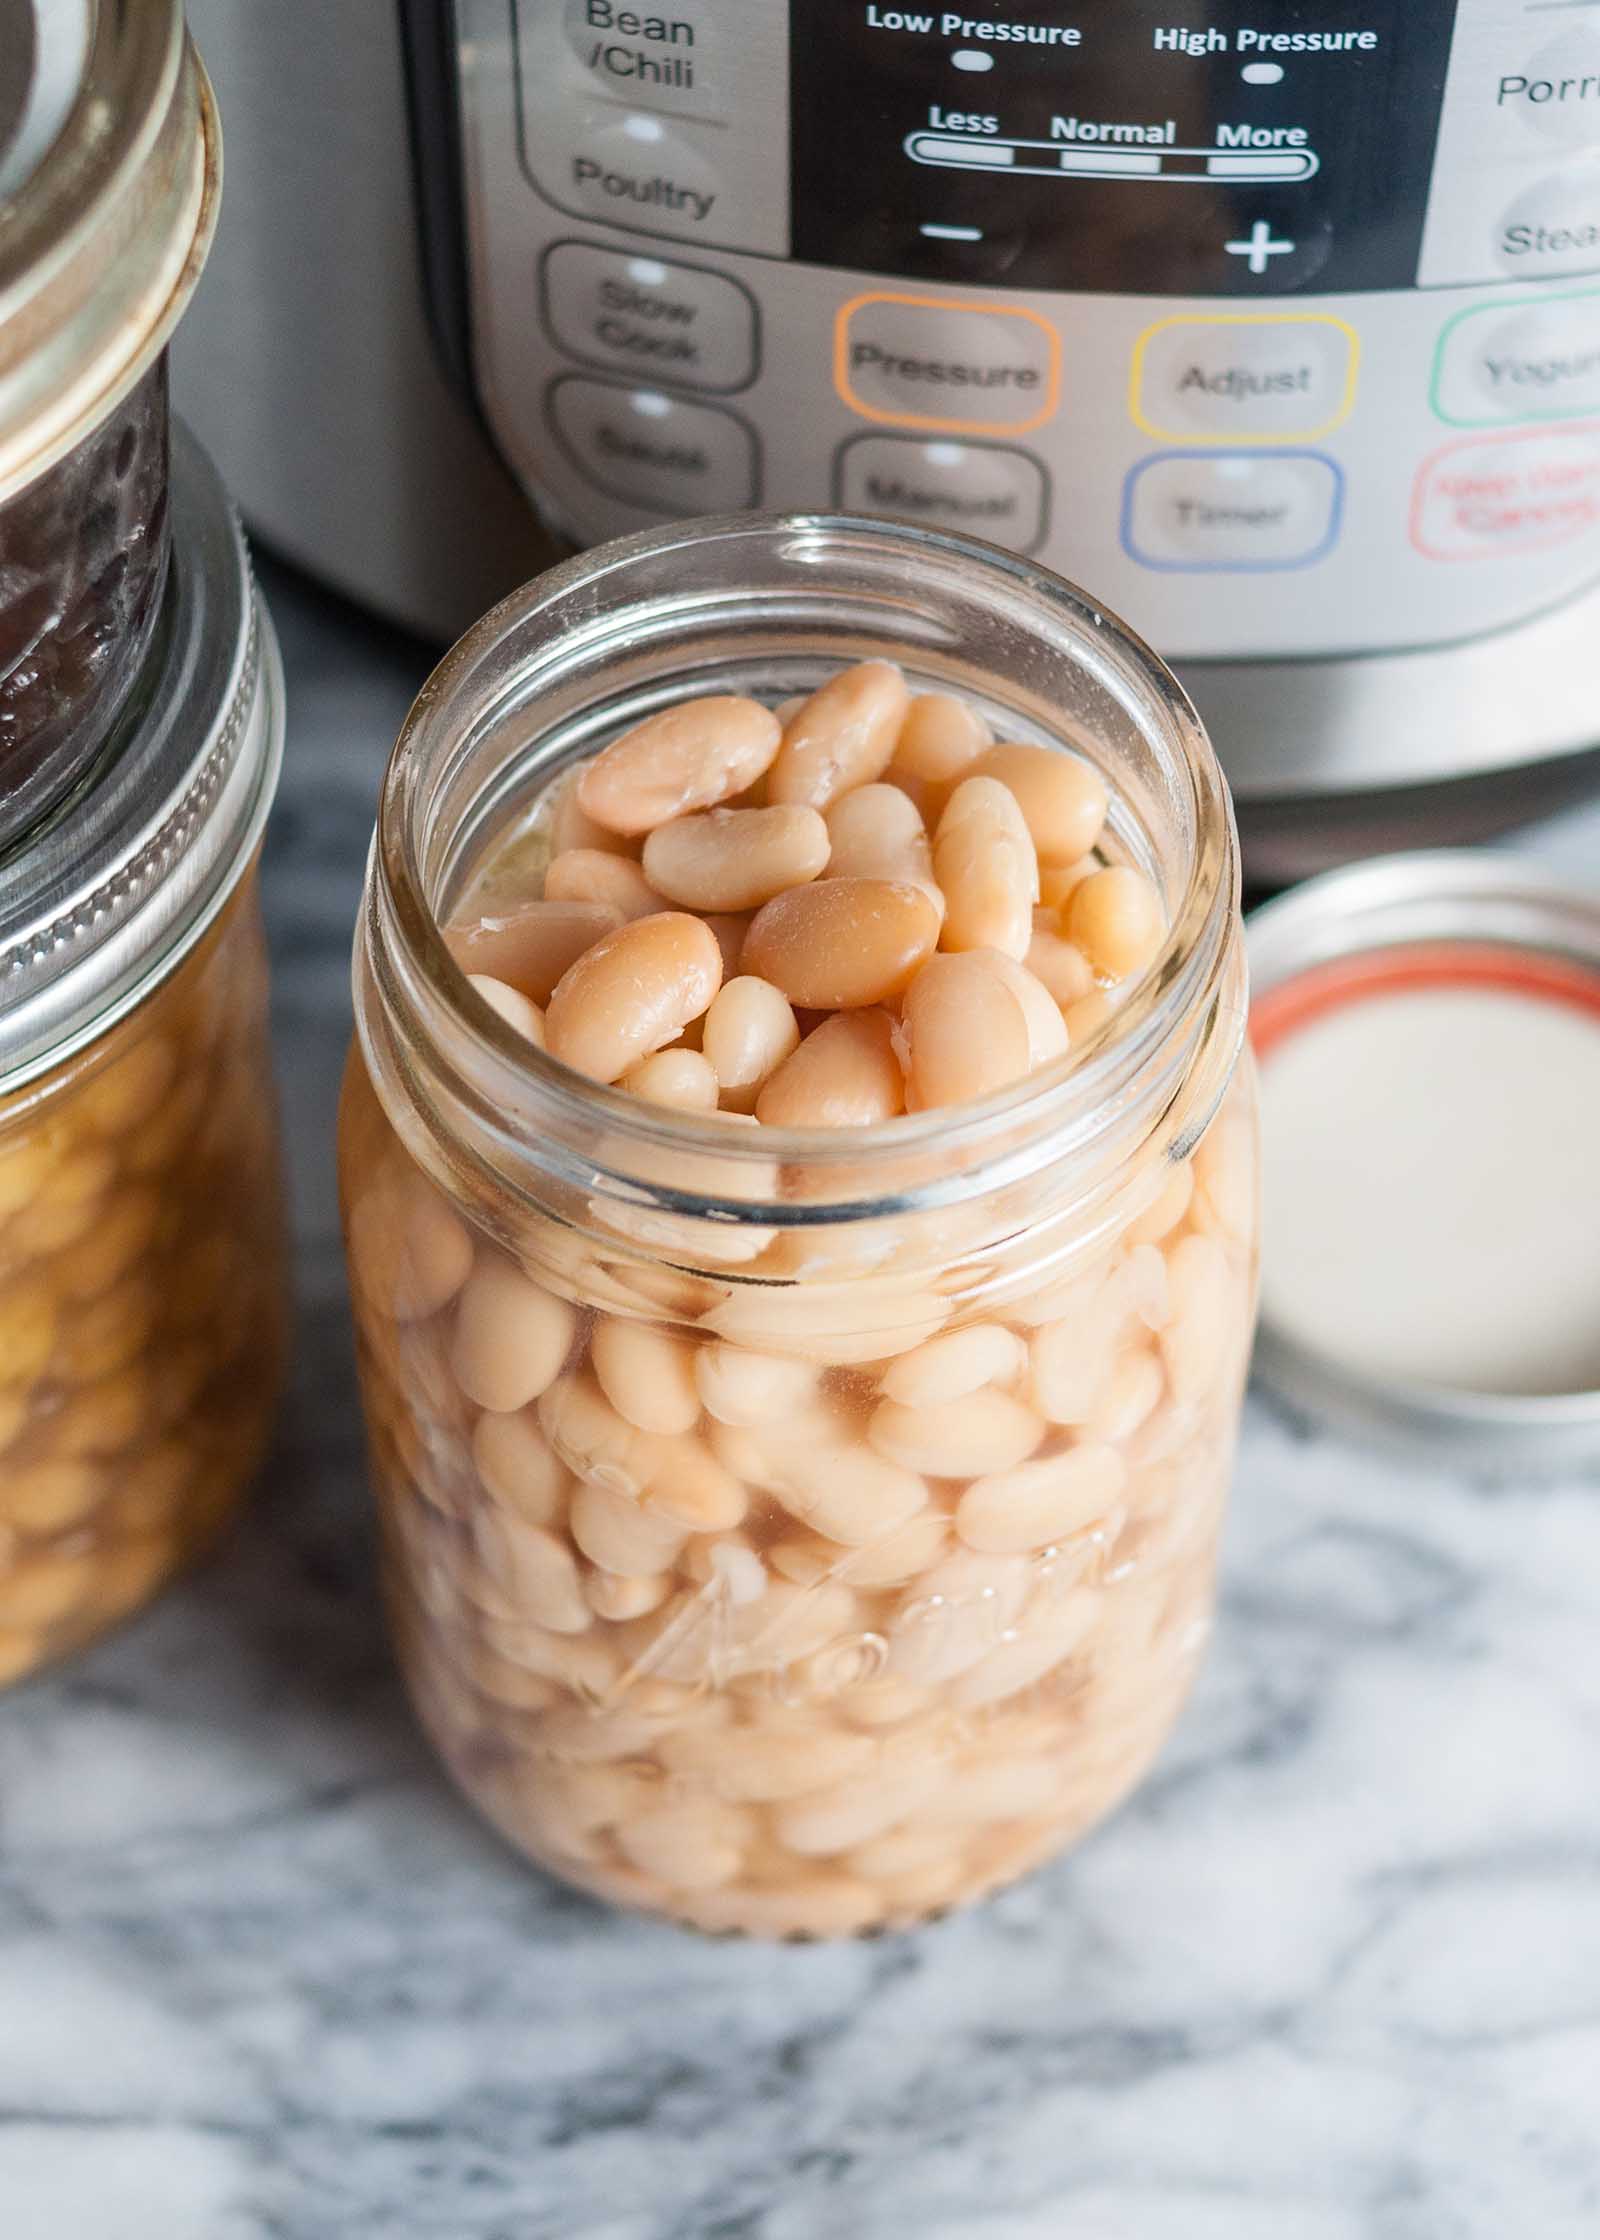 How To Make Fast, No-Soak Beans in the Pressure Cooker